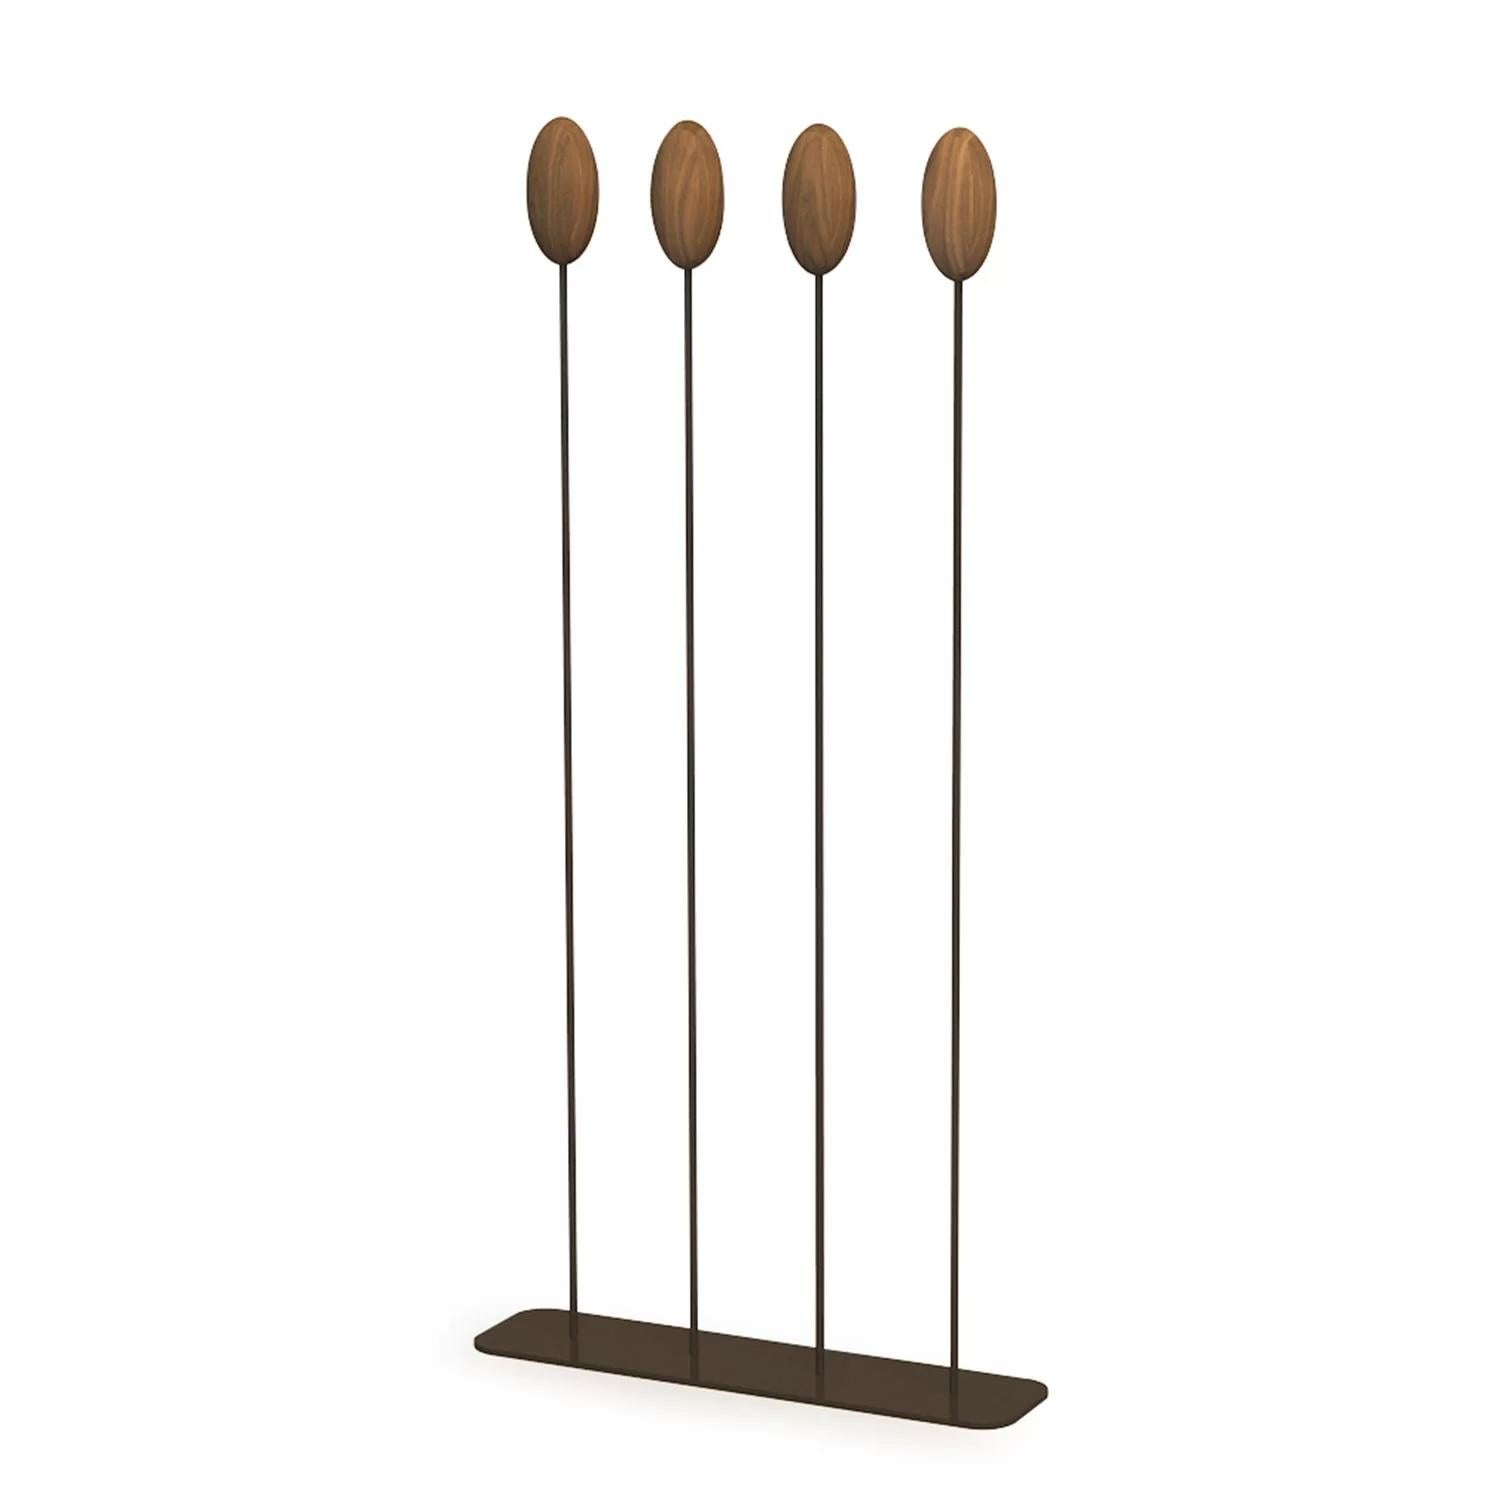 Coat hanger with an iron base and flexibile vertical central supports, topped by an egg made entirely in solid wood with glued slats, replacing the classic hooks. Available in two versions: with square or round base.